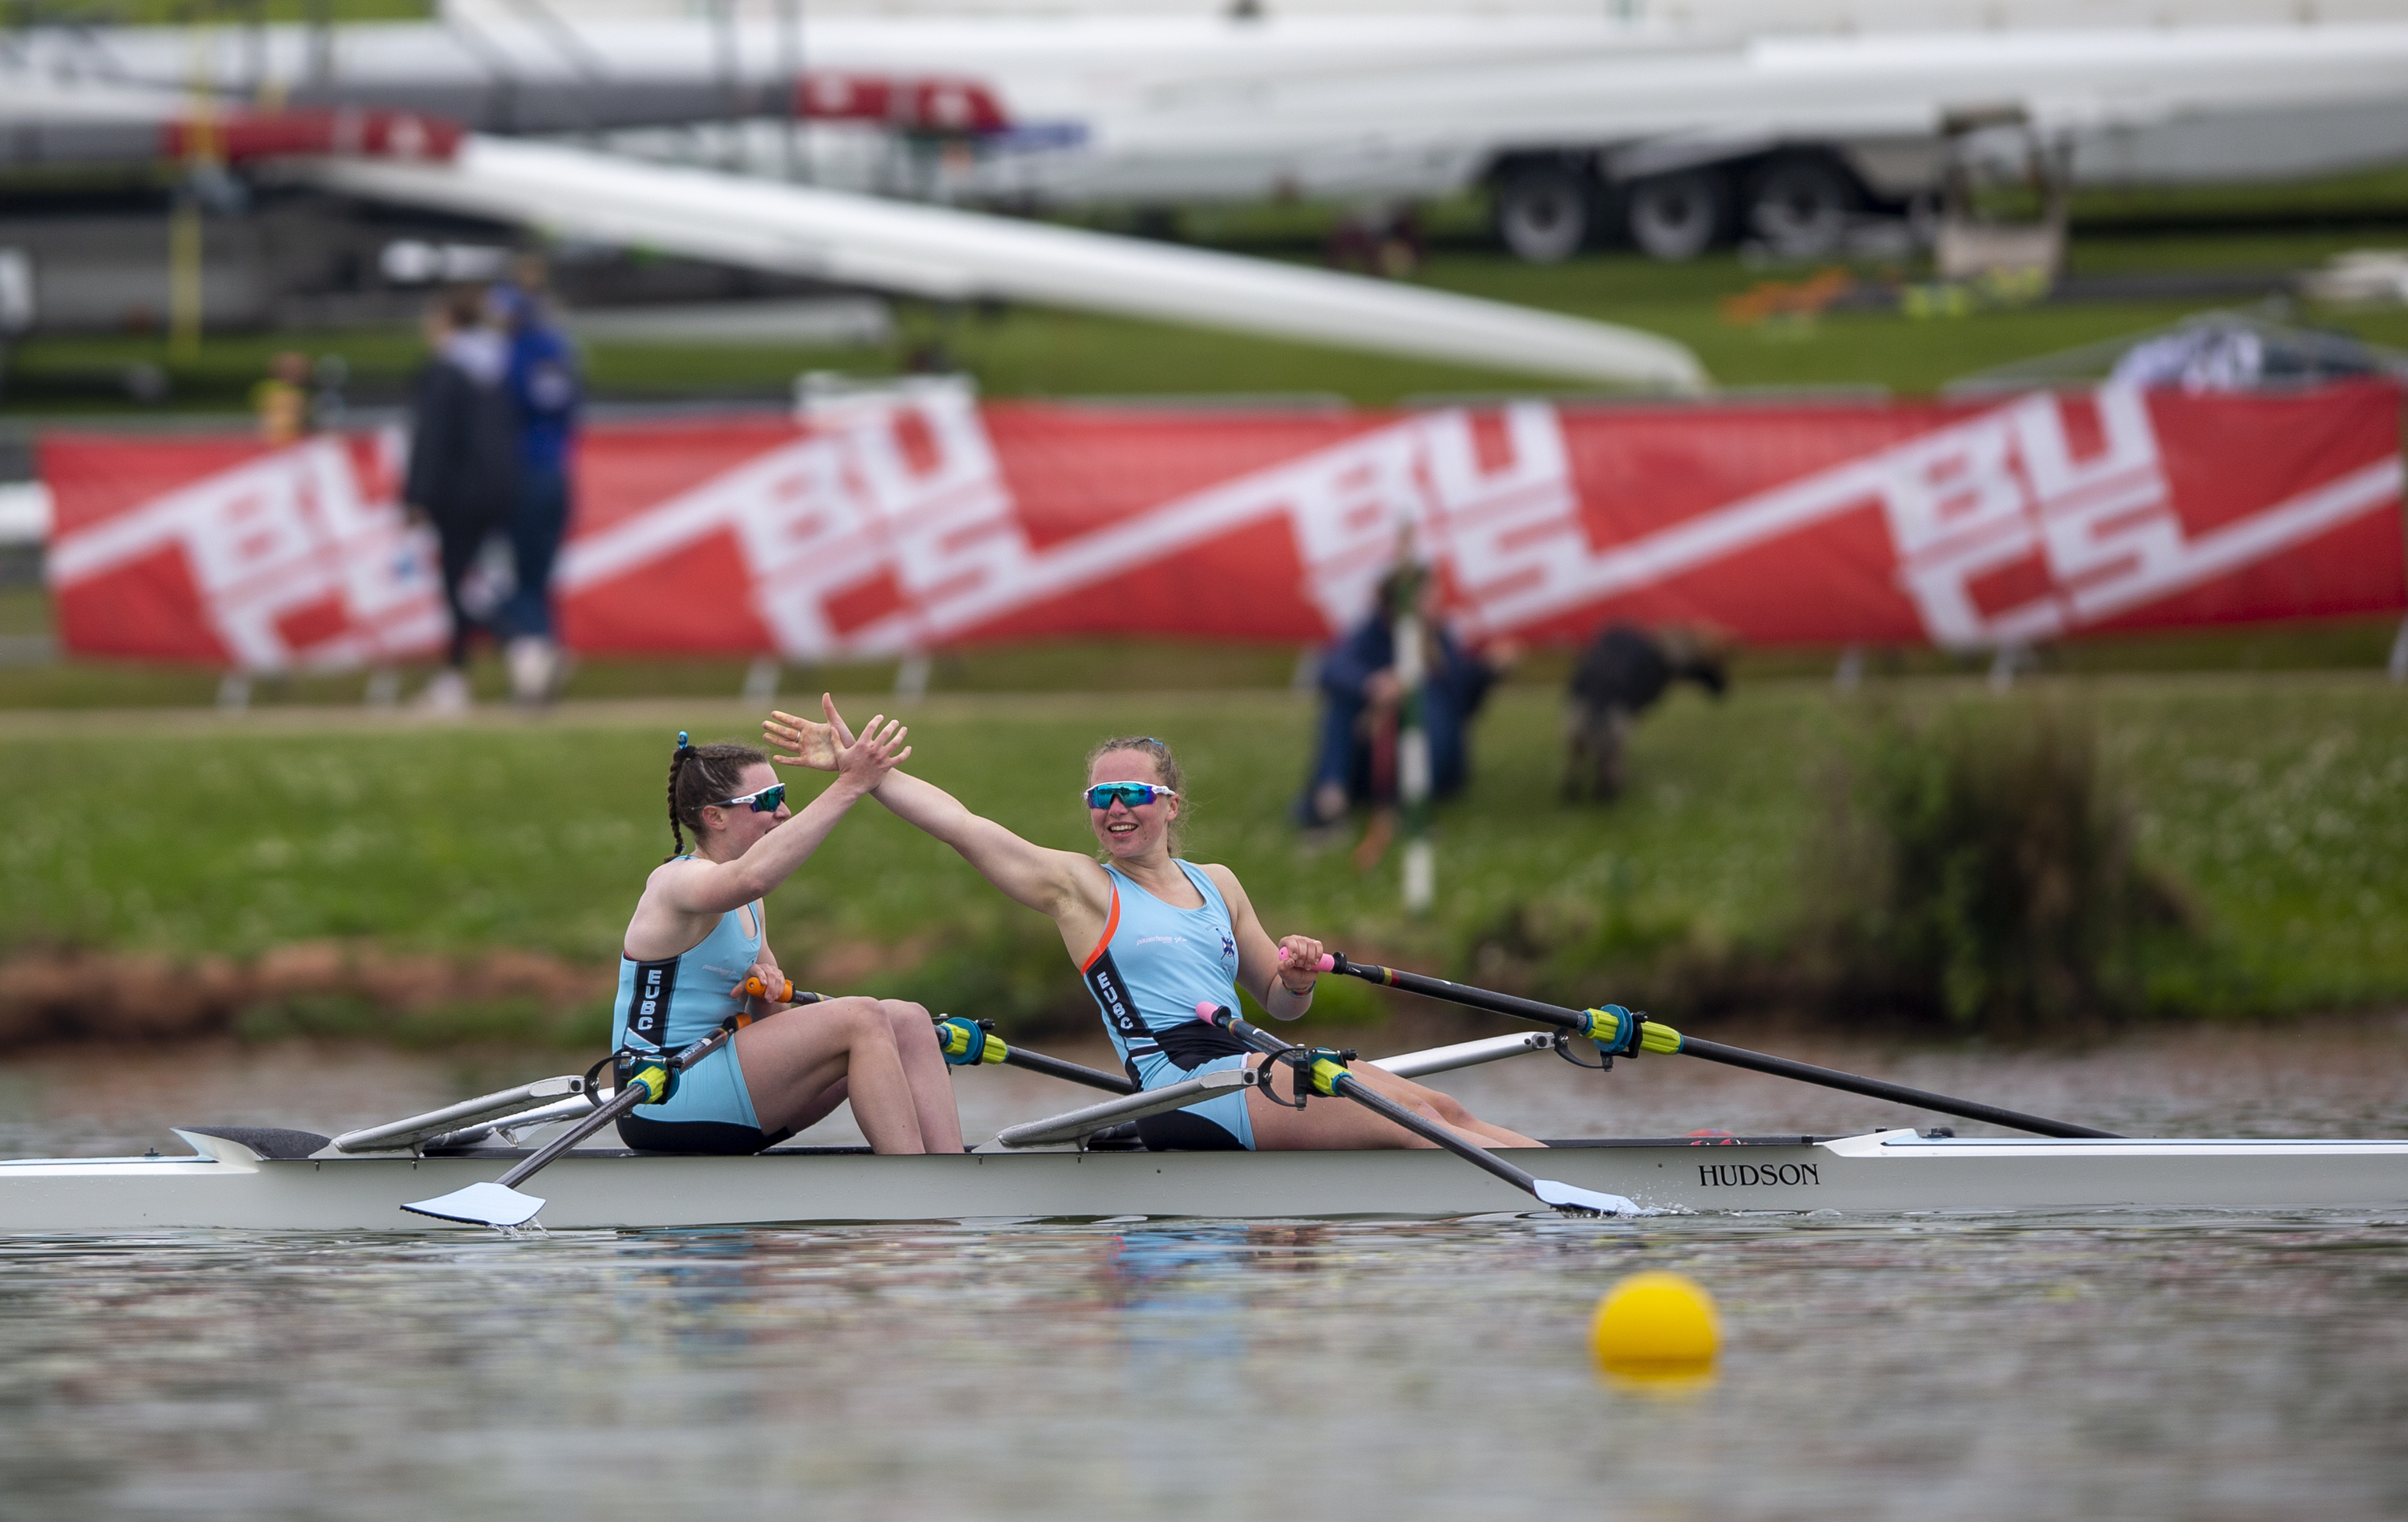 Rowers celebrating on the water